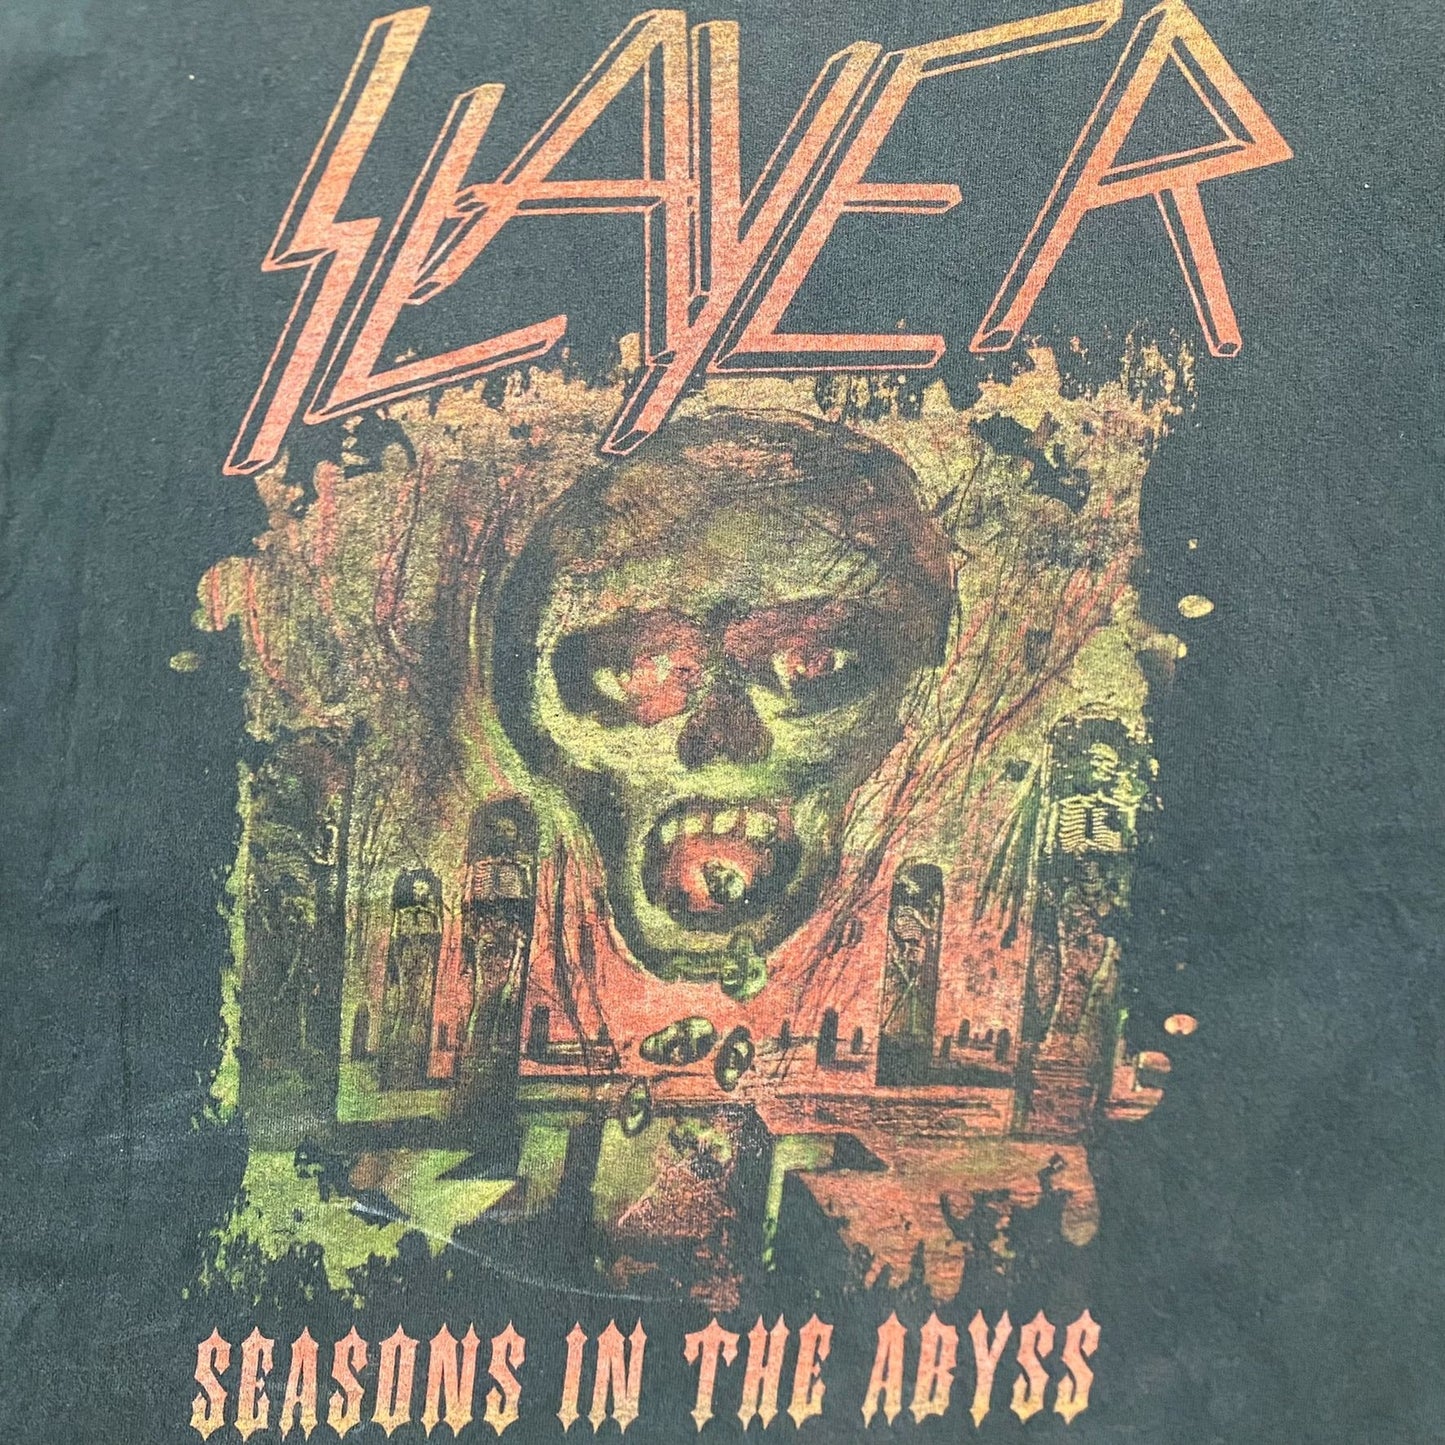 Vintage Y2K Slayer Seasons in the Abyss Tour Metal Band Tee